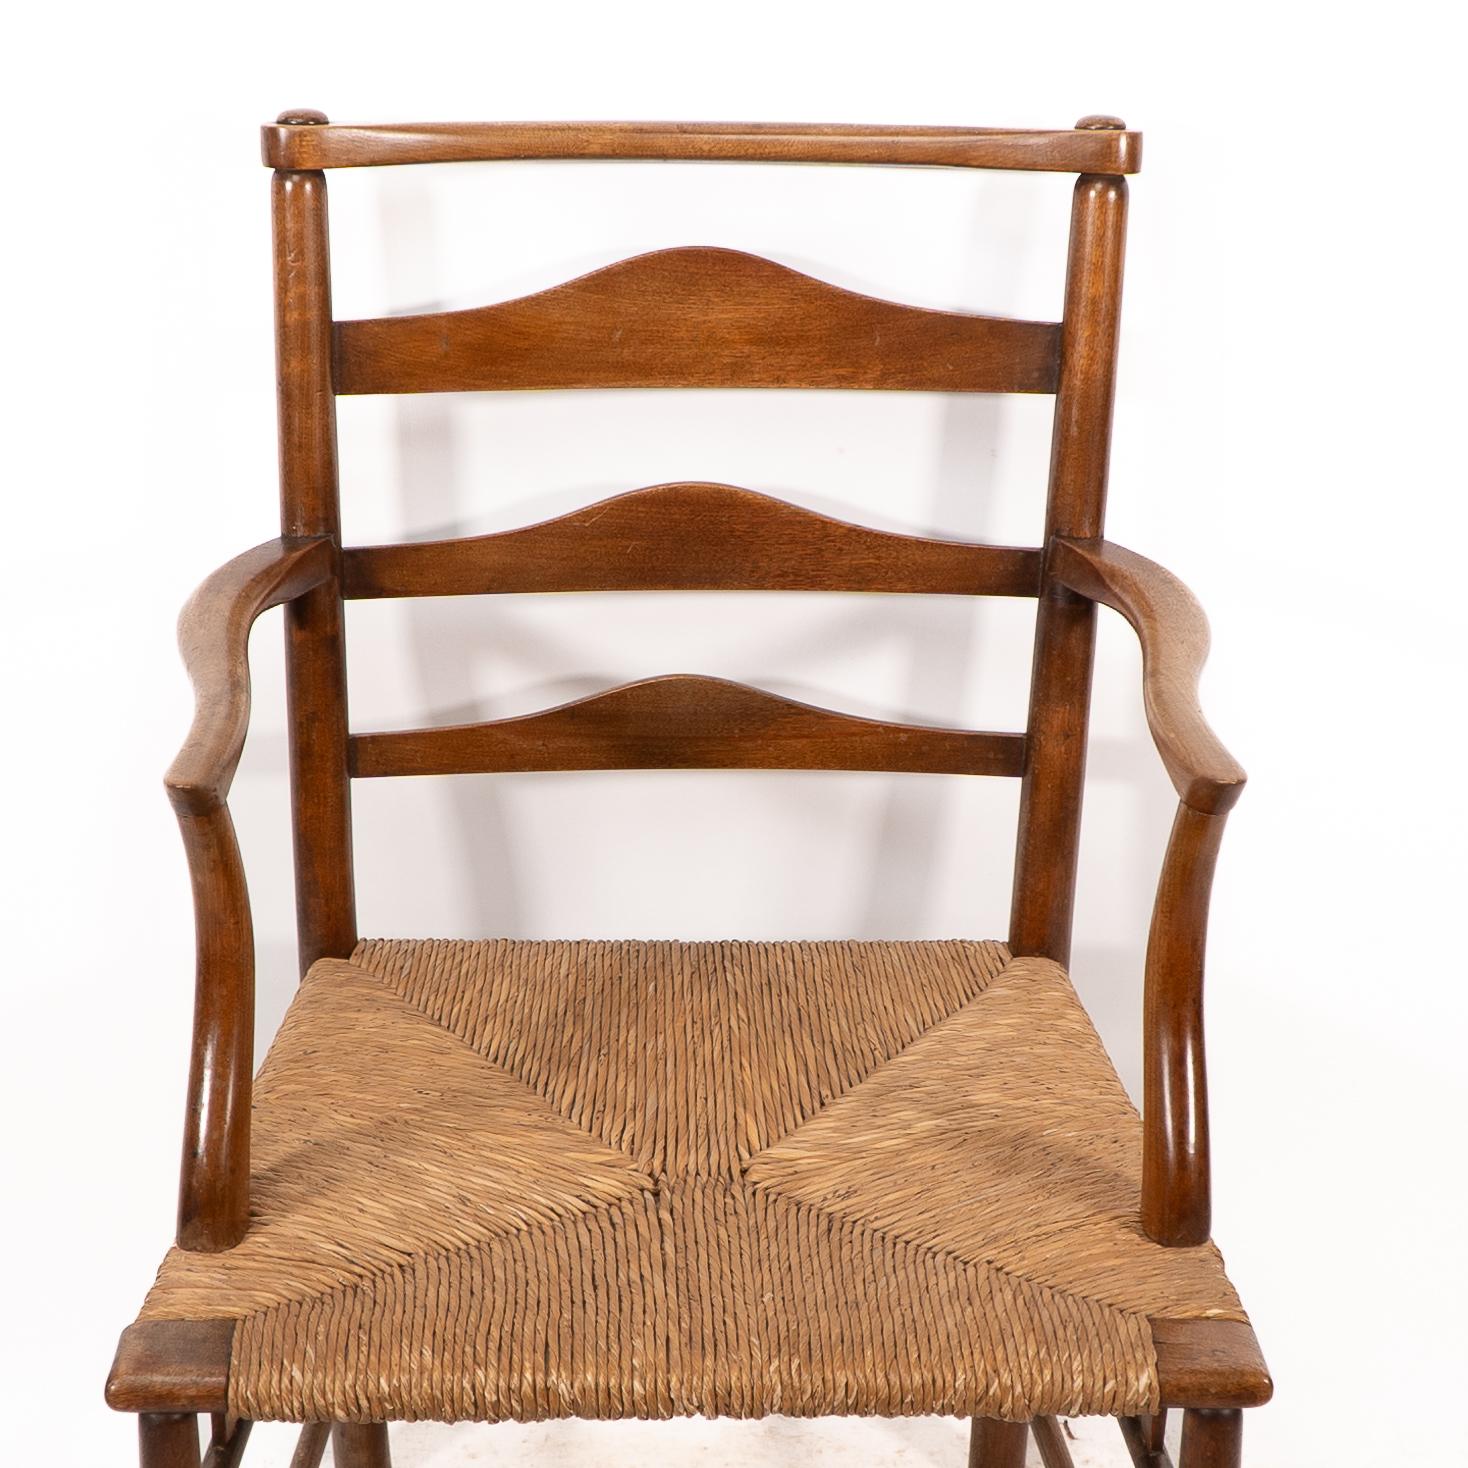 Rush C R Ashbee. An Arts and Crafts rush seat ladder back armchair For Sale